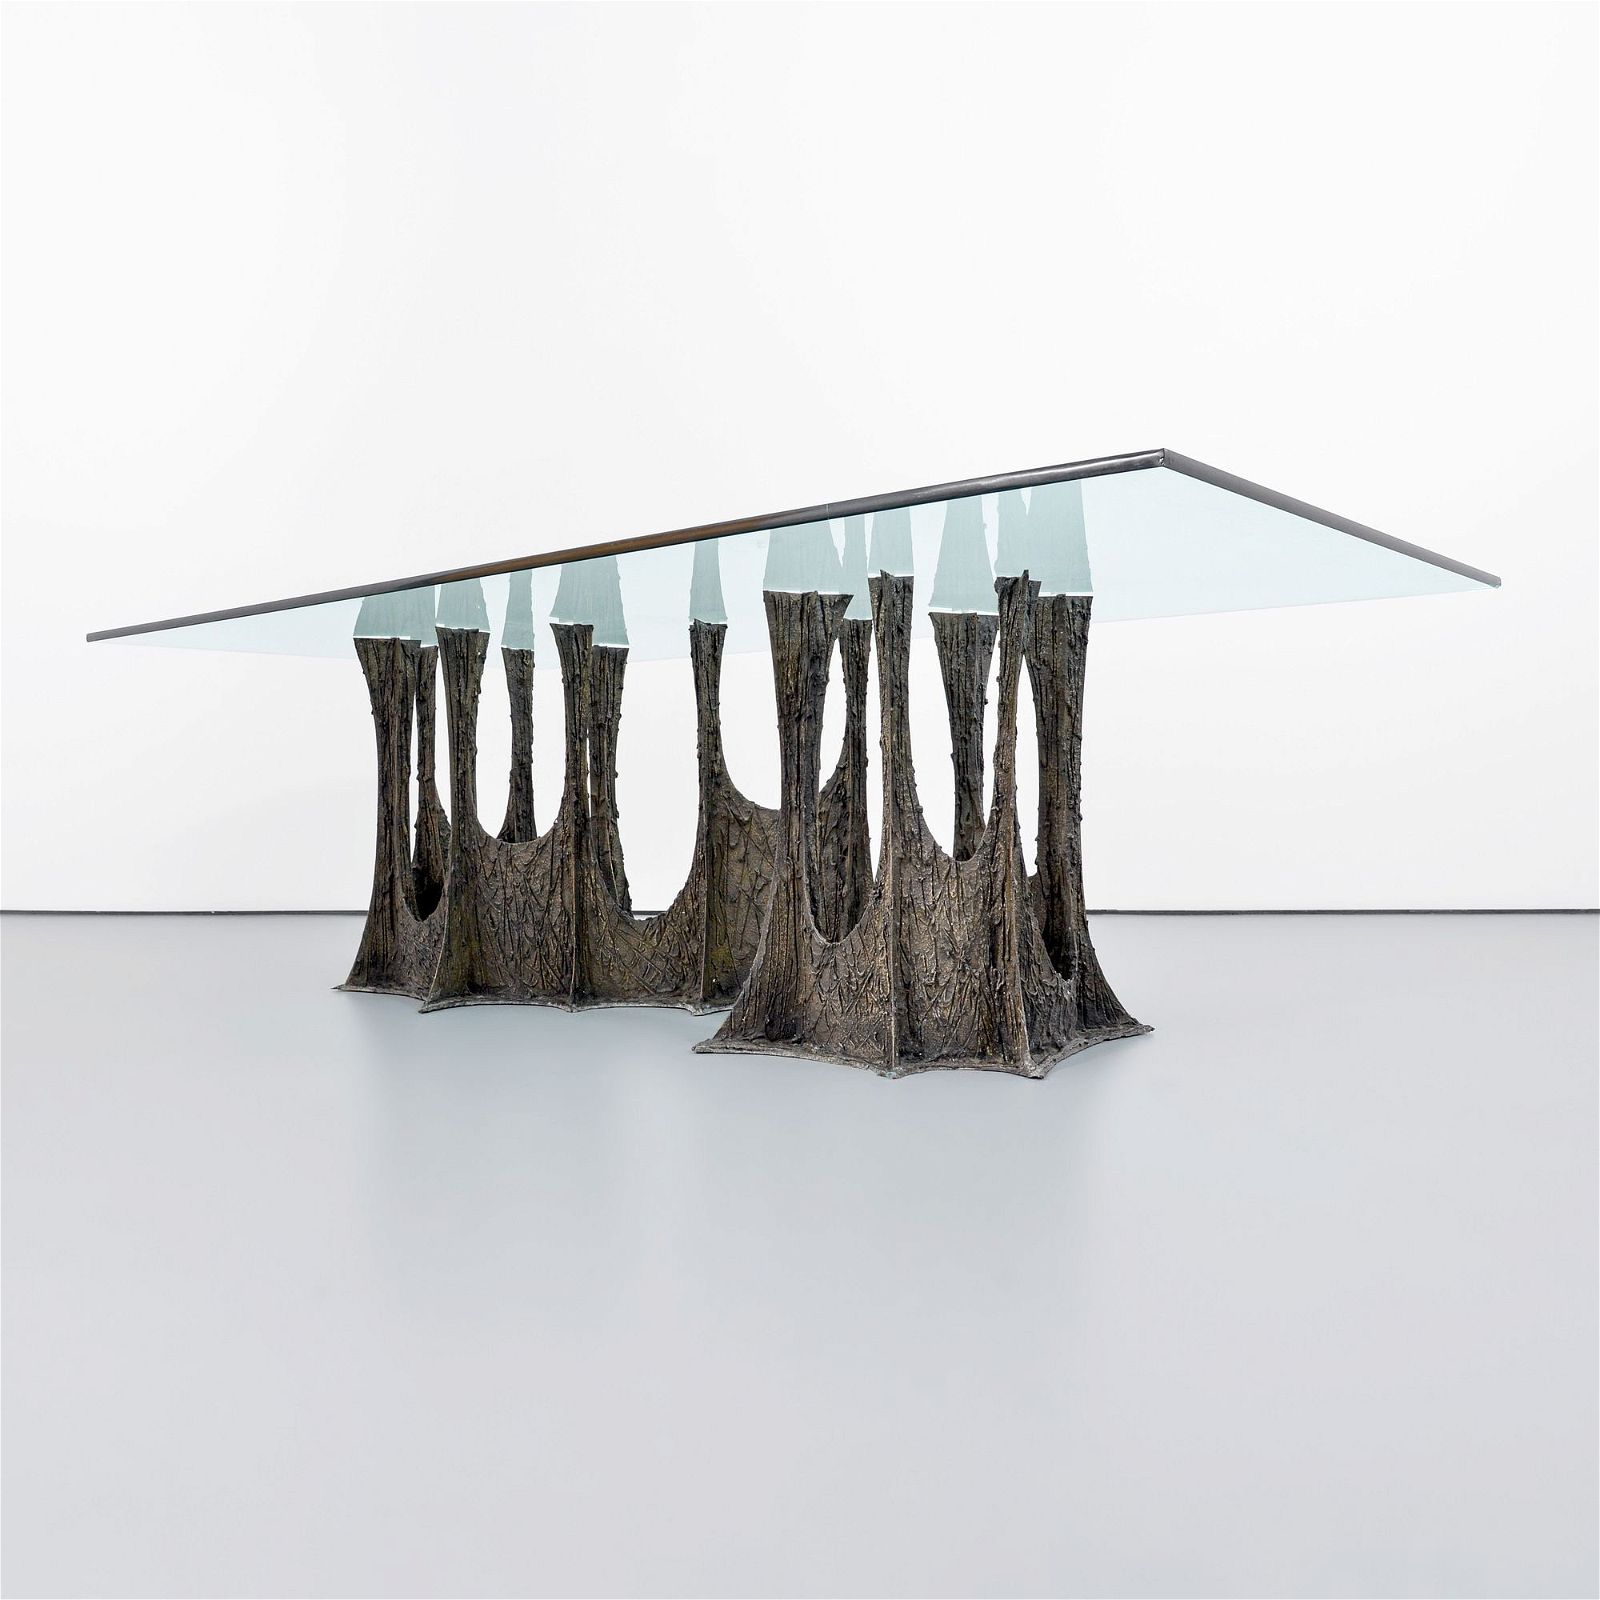 A 1975 Paul Evans Stalagmite table sold for $26,800 at Palm Beach Modern Auctions.
